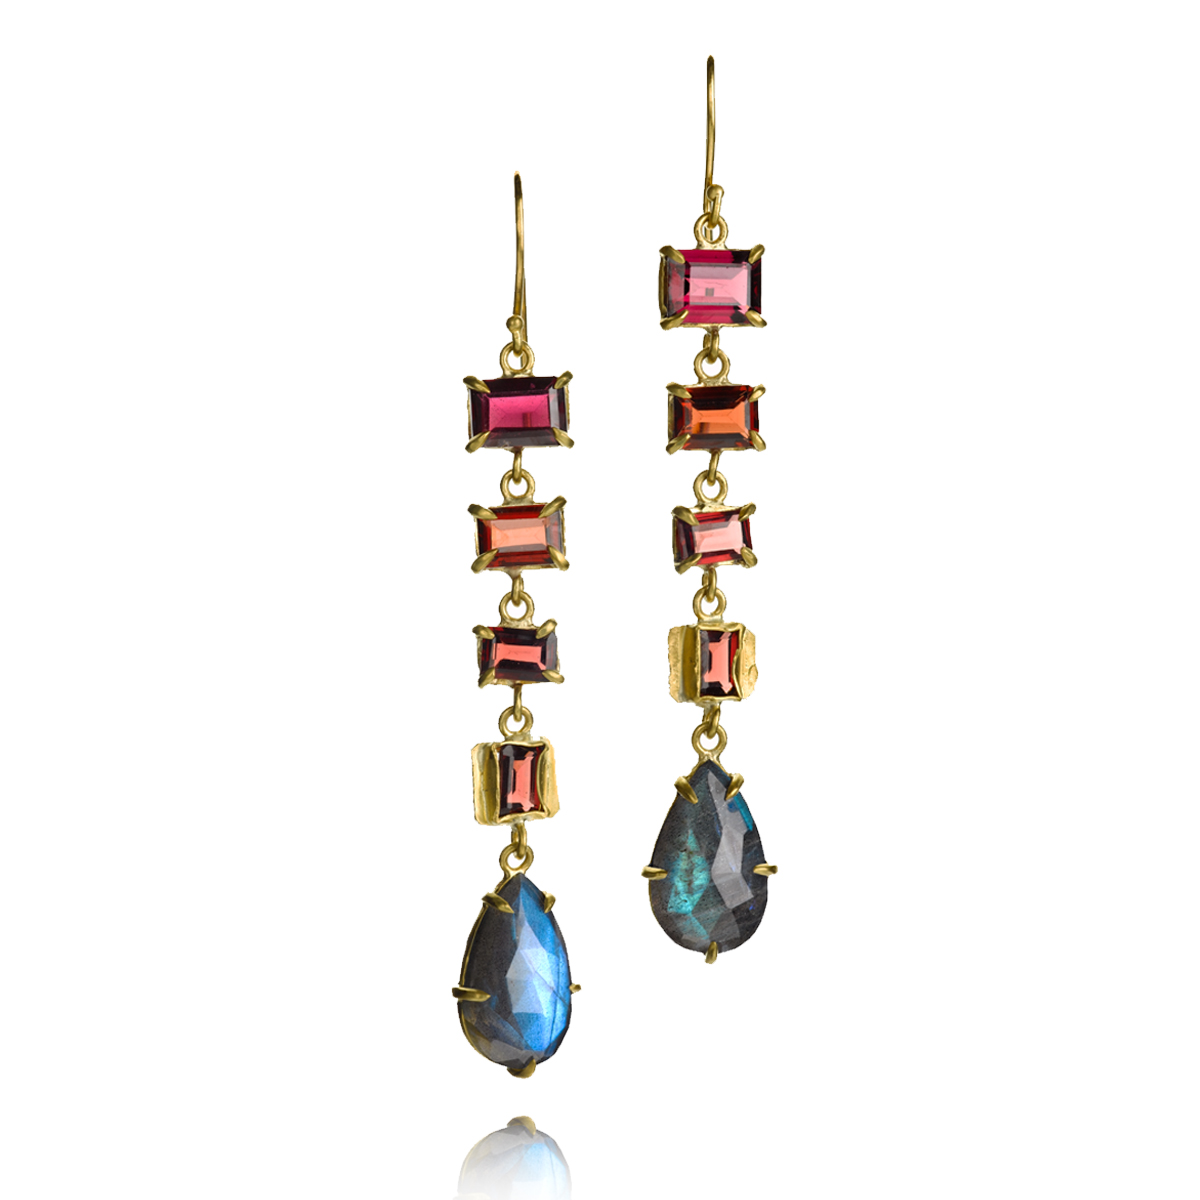  Color for days. We love these 22k earrings with rhodolite garnet and labradorite,&nbsp;$4,620. 